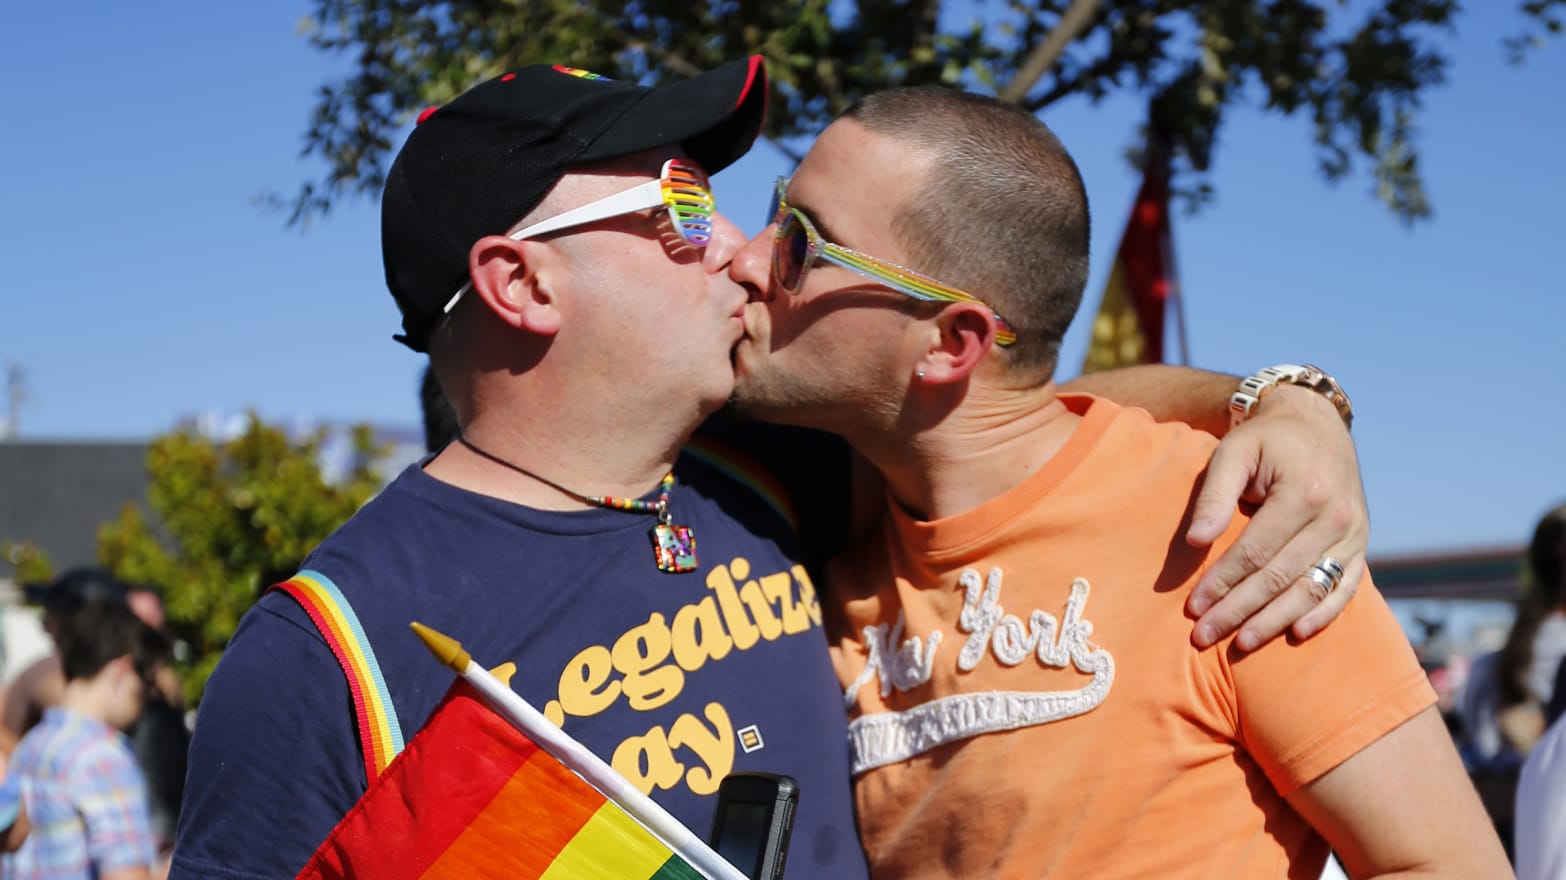 Were Christians Right About Gay Marriage All Along?